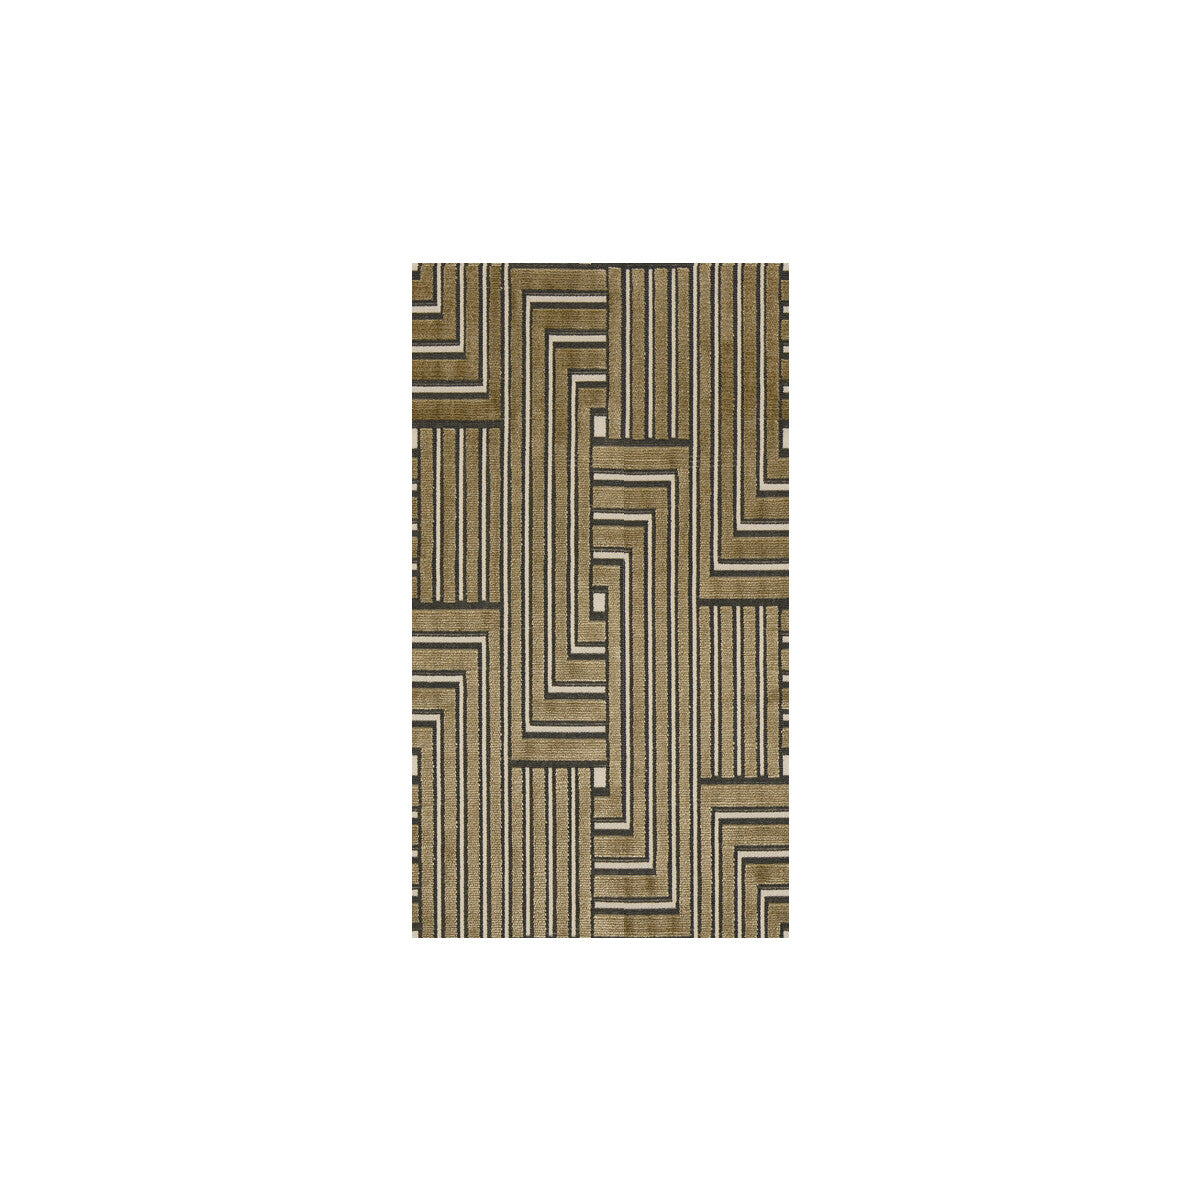 Louvered Maze fabric in linen color - pattern GWF-3041.816.0 - by Lee Jofa Modern in the Ventana Weaves collection